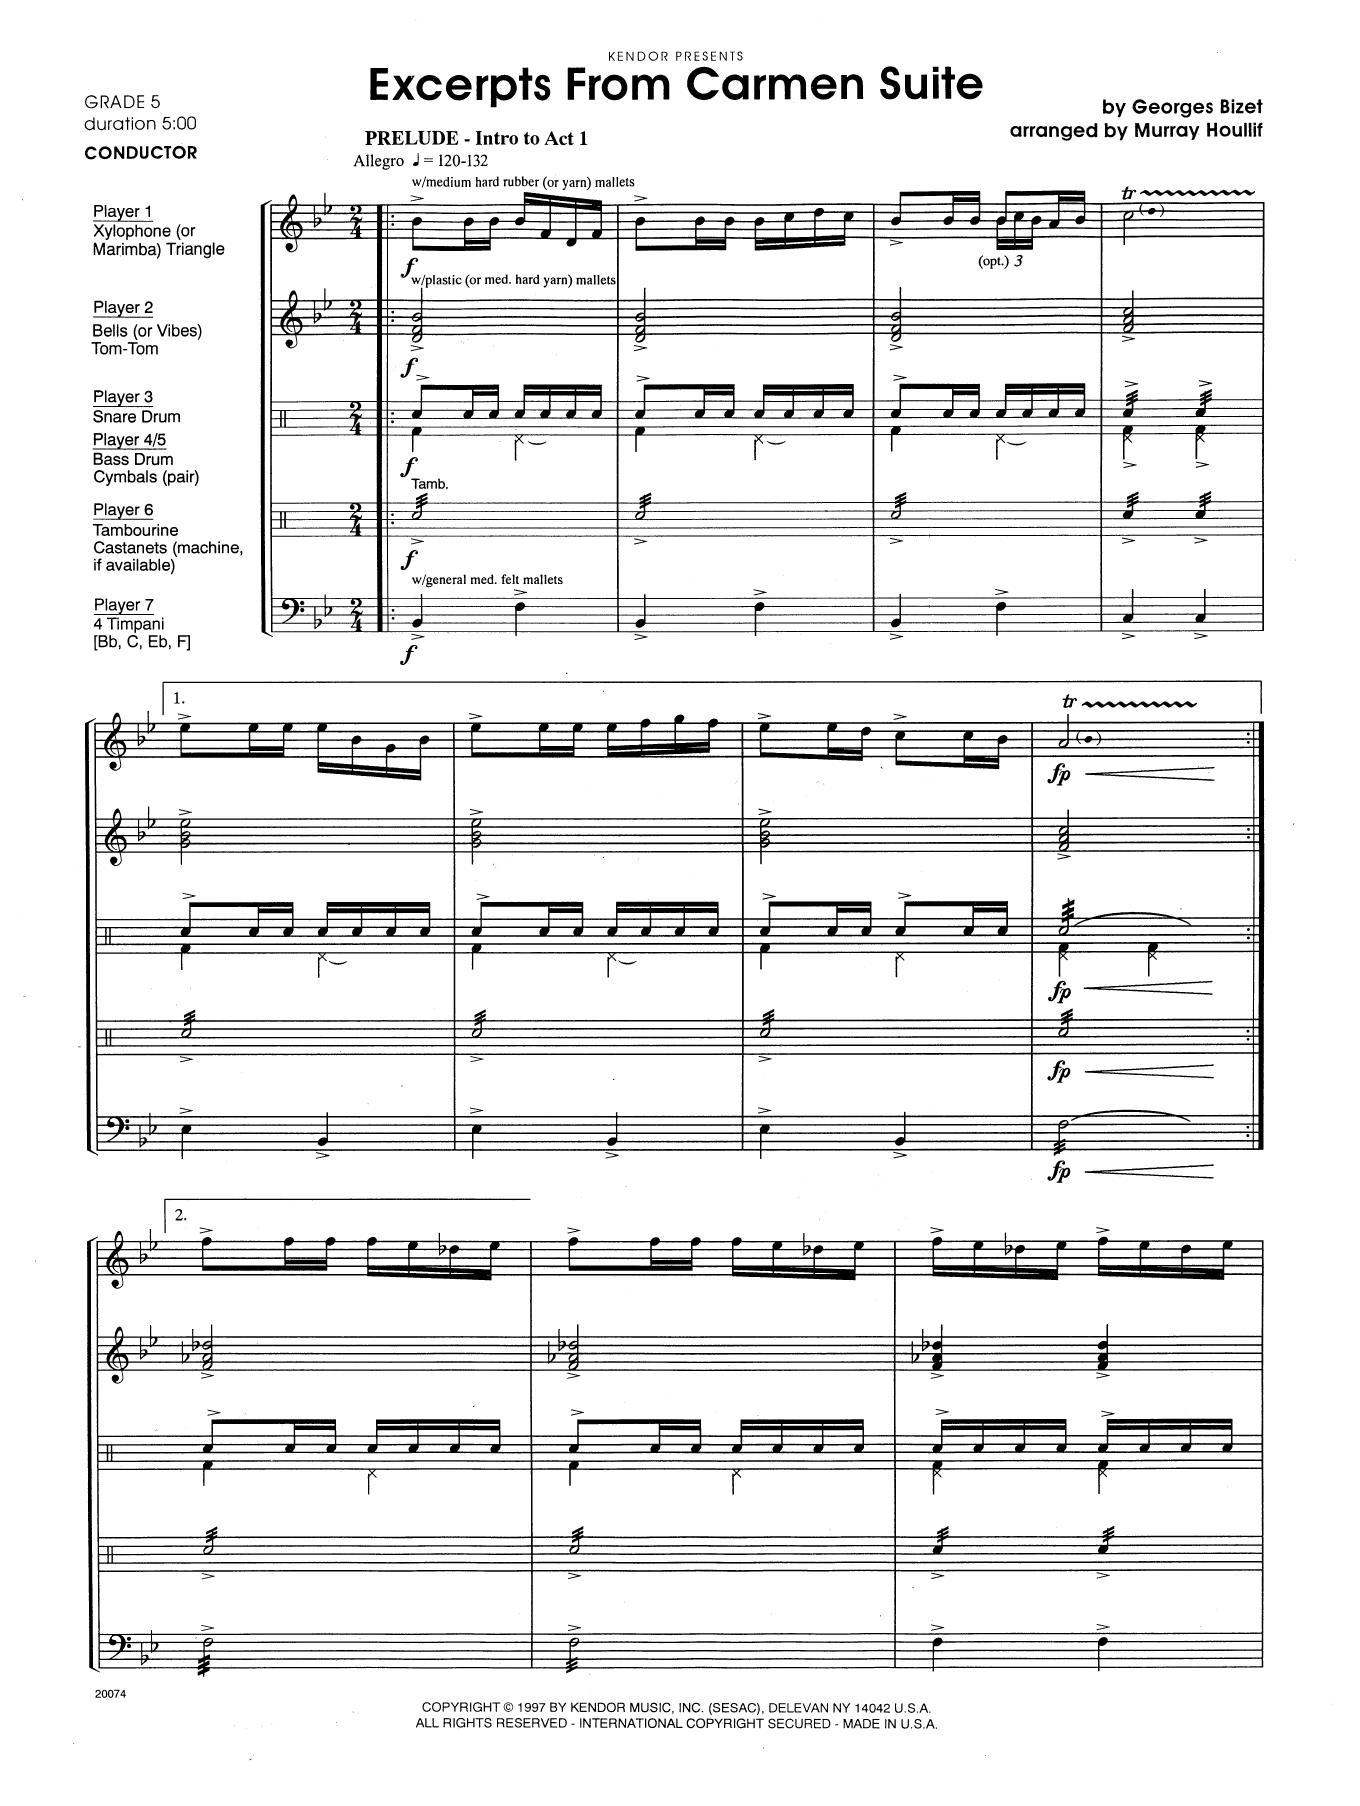 Download Murray Houllif Excerpts From Carmen Suite - Full Score Sheet Music